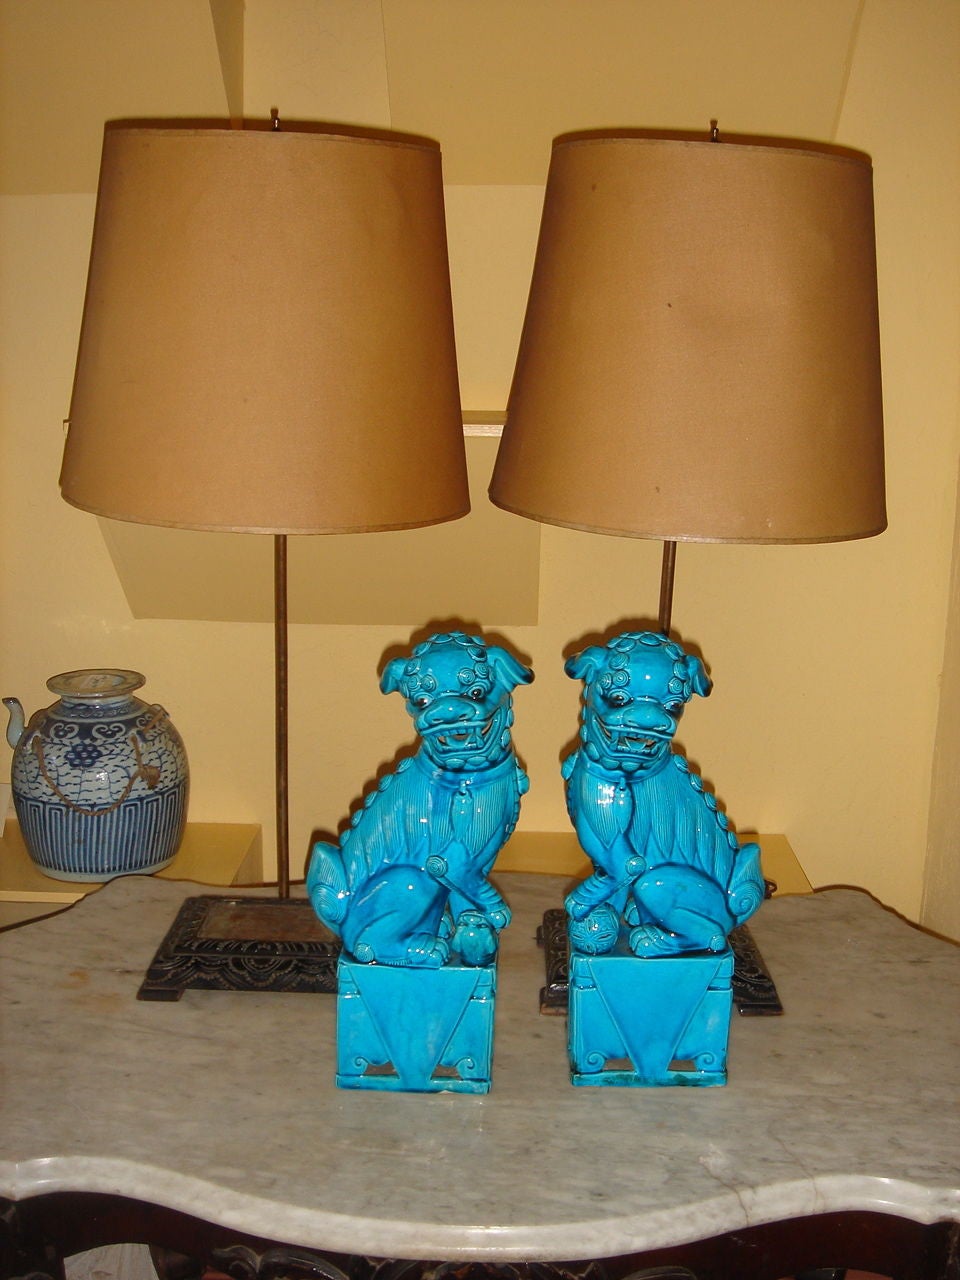 Turquiose Foo Dog Statues sit on hand carved Lamp Stands with brass rods which can be shortened or made higher with half lamp shades. Note: Statues are separate from lamp stands.